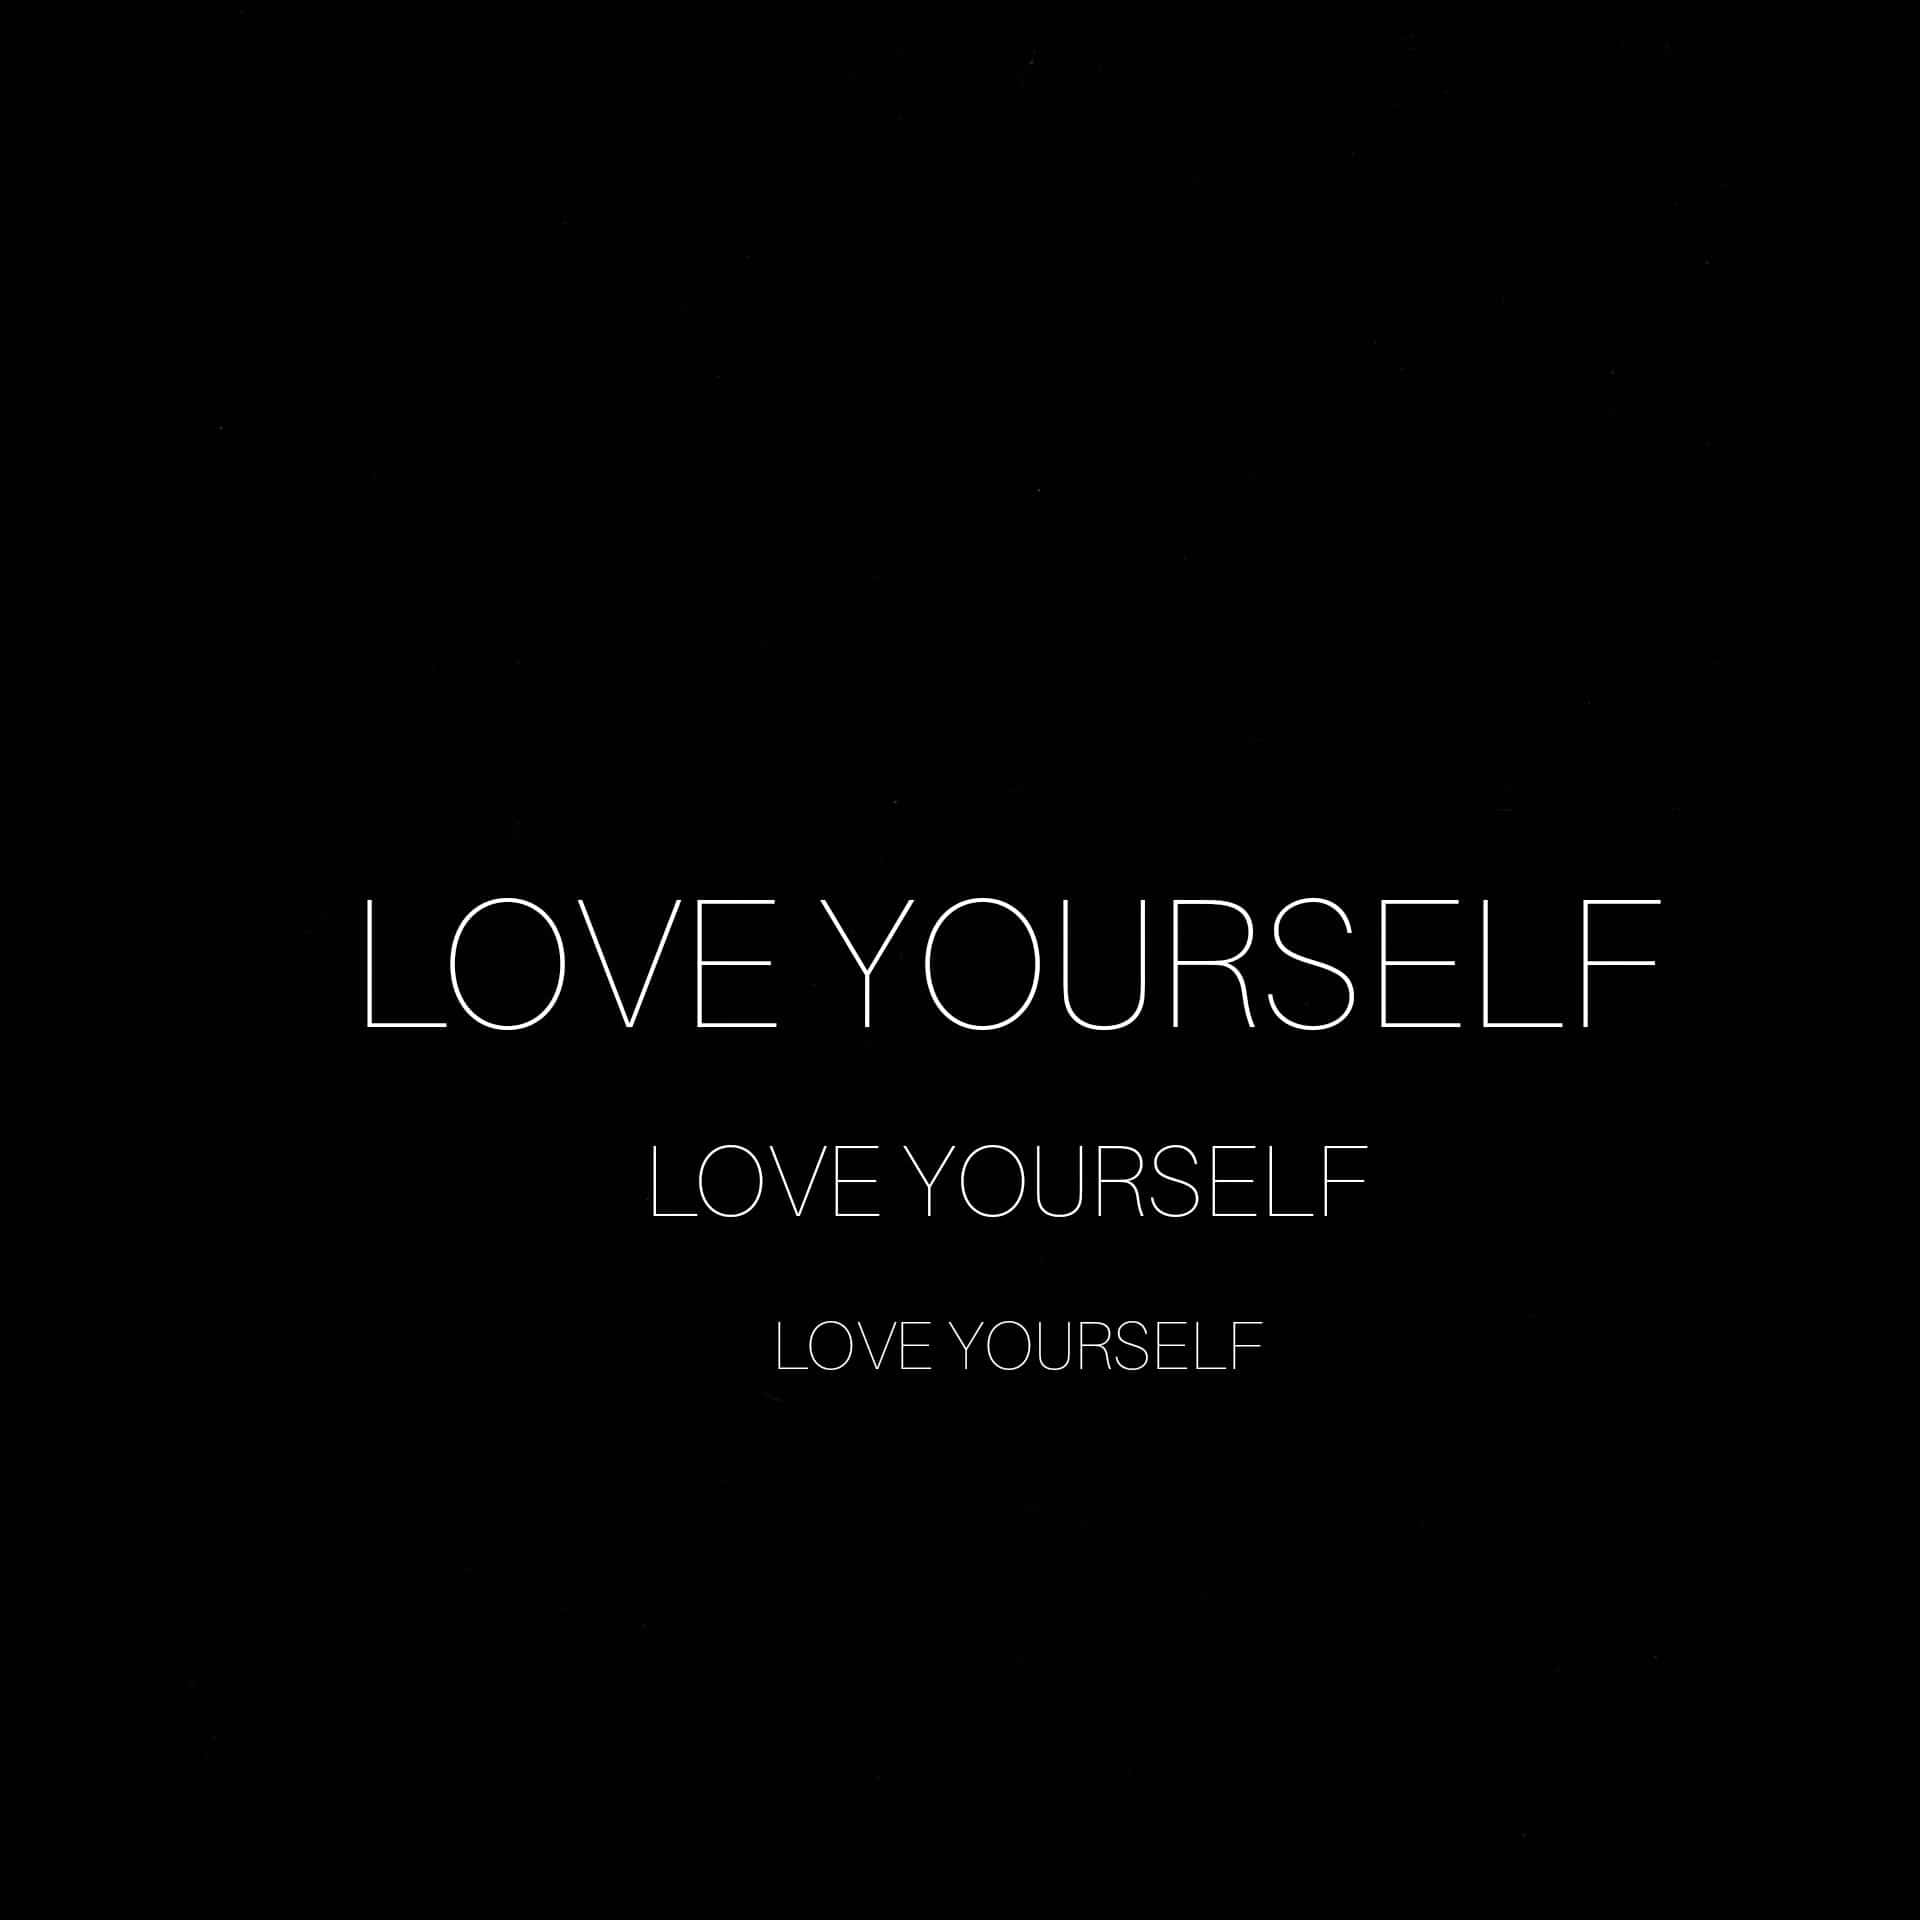 Love yourself first and everything else will fall into place Wallpaper